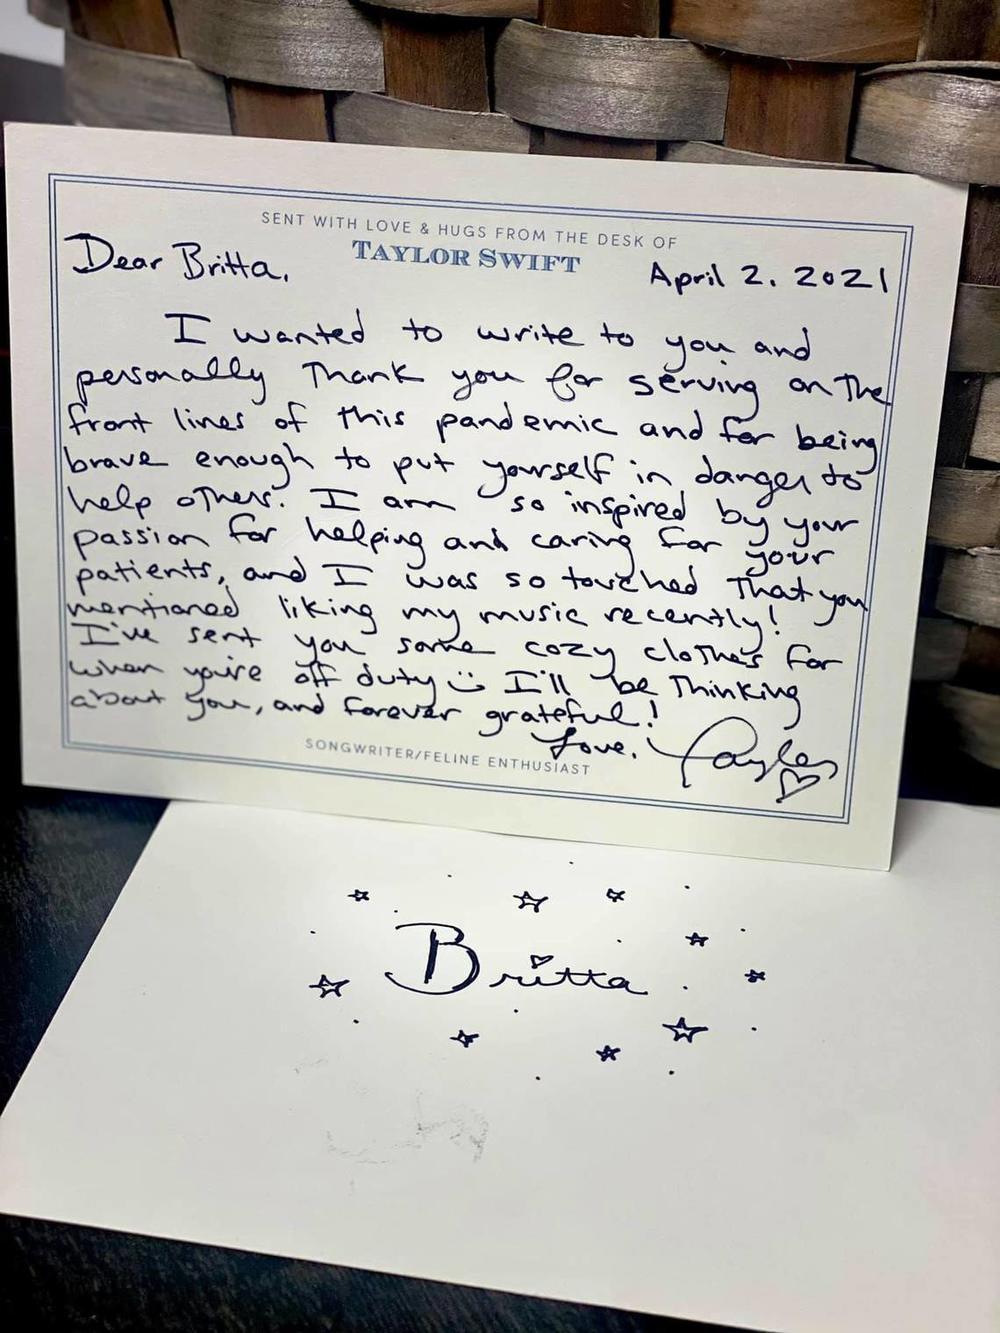 Note from Taylor Swift